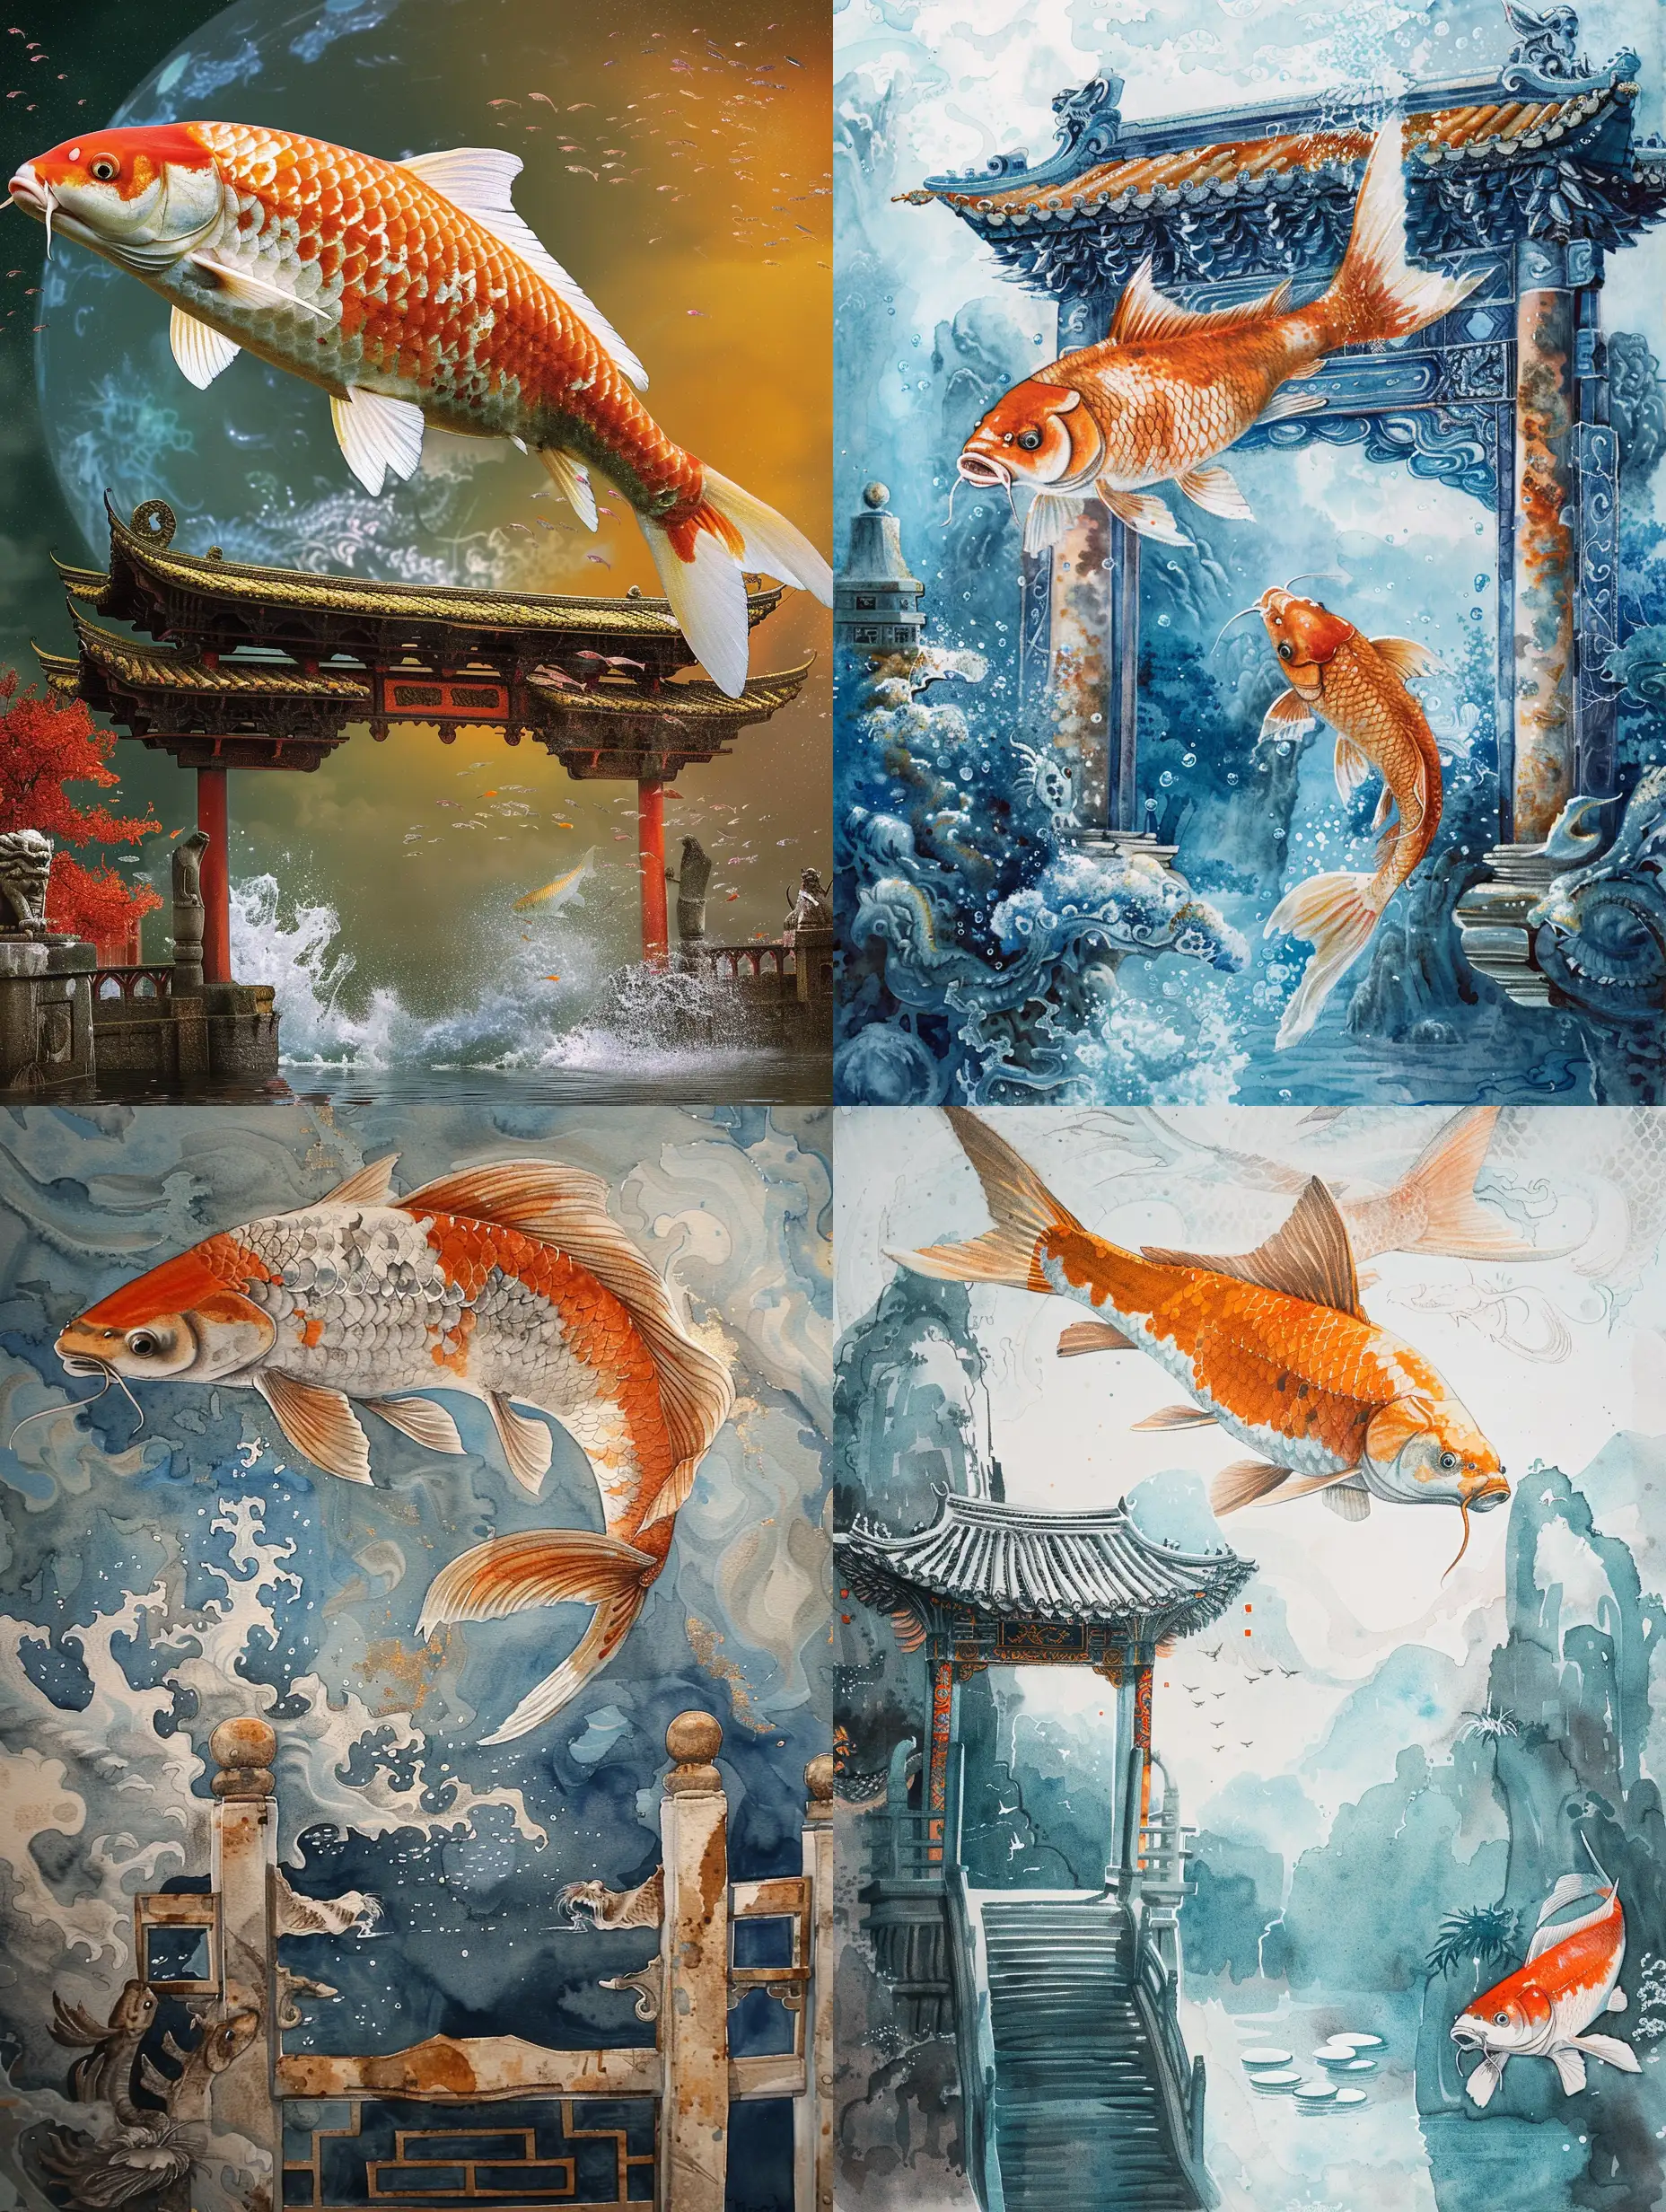 Carp-Leaping-Over-the-Dragon-Gate-Artwork